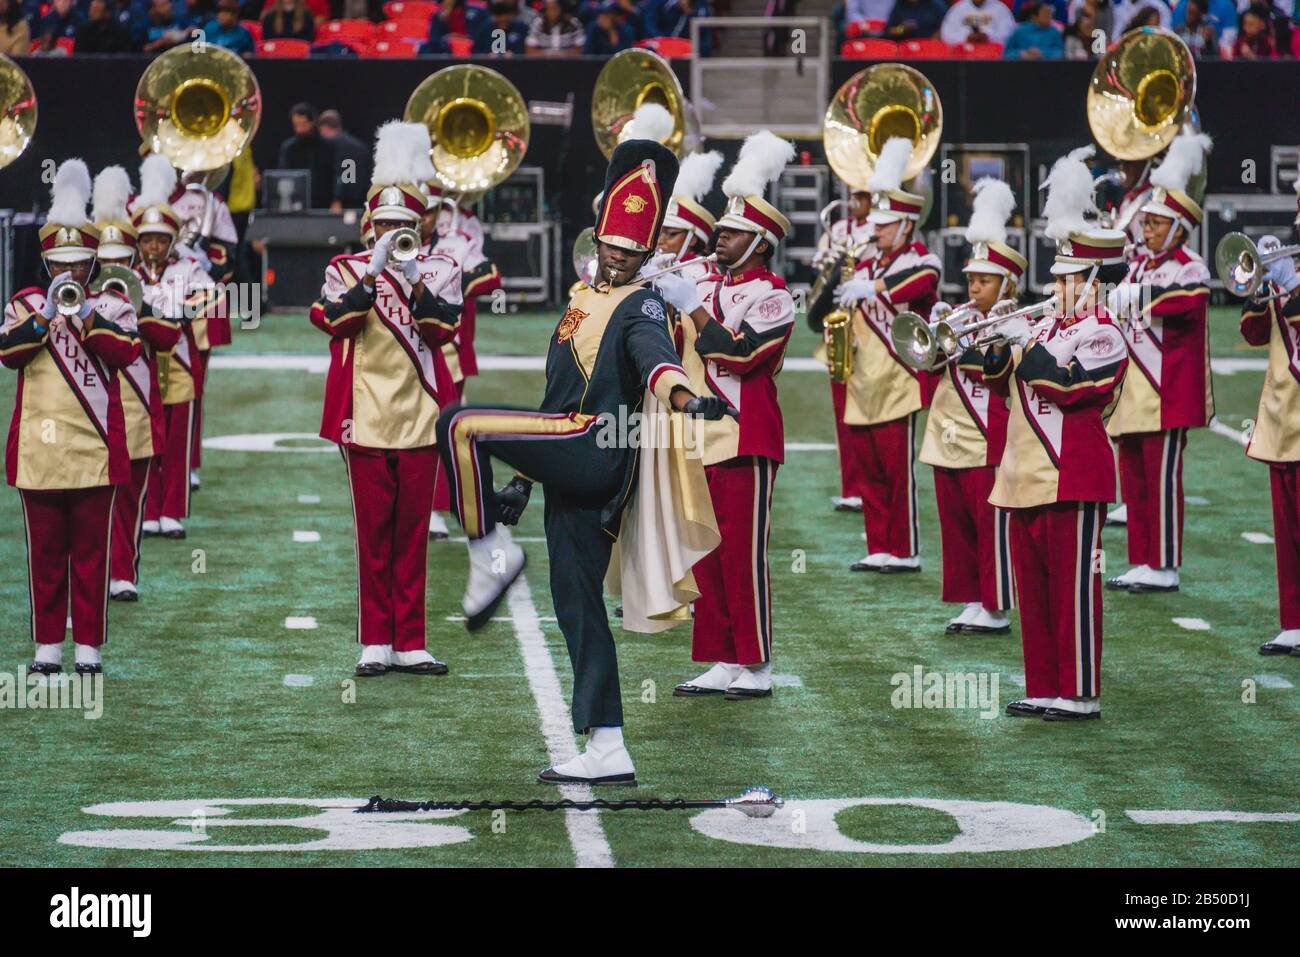 The Honda Battle of the Bands brings the top HBCU marching bands, dance